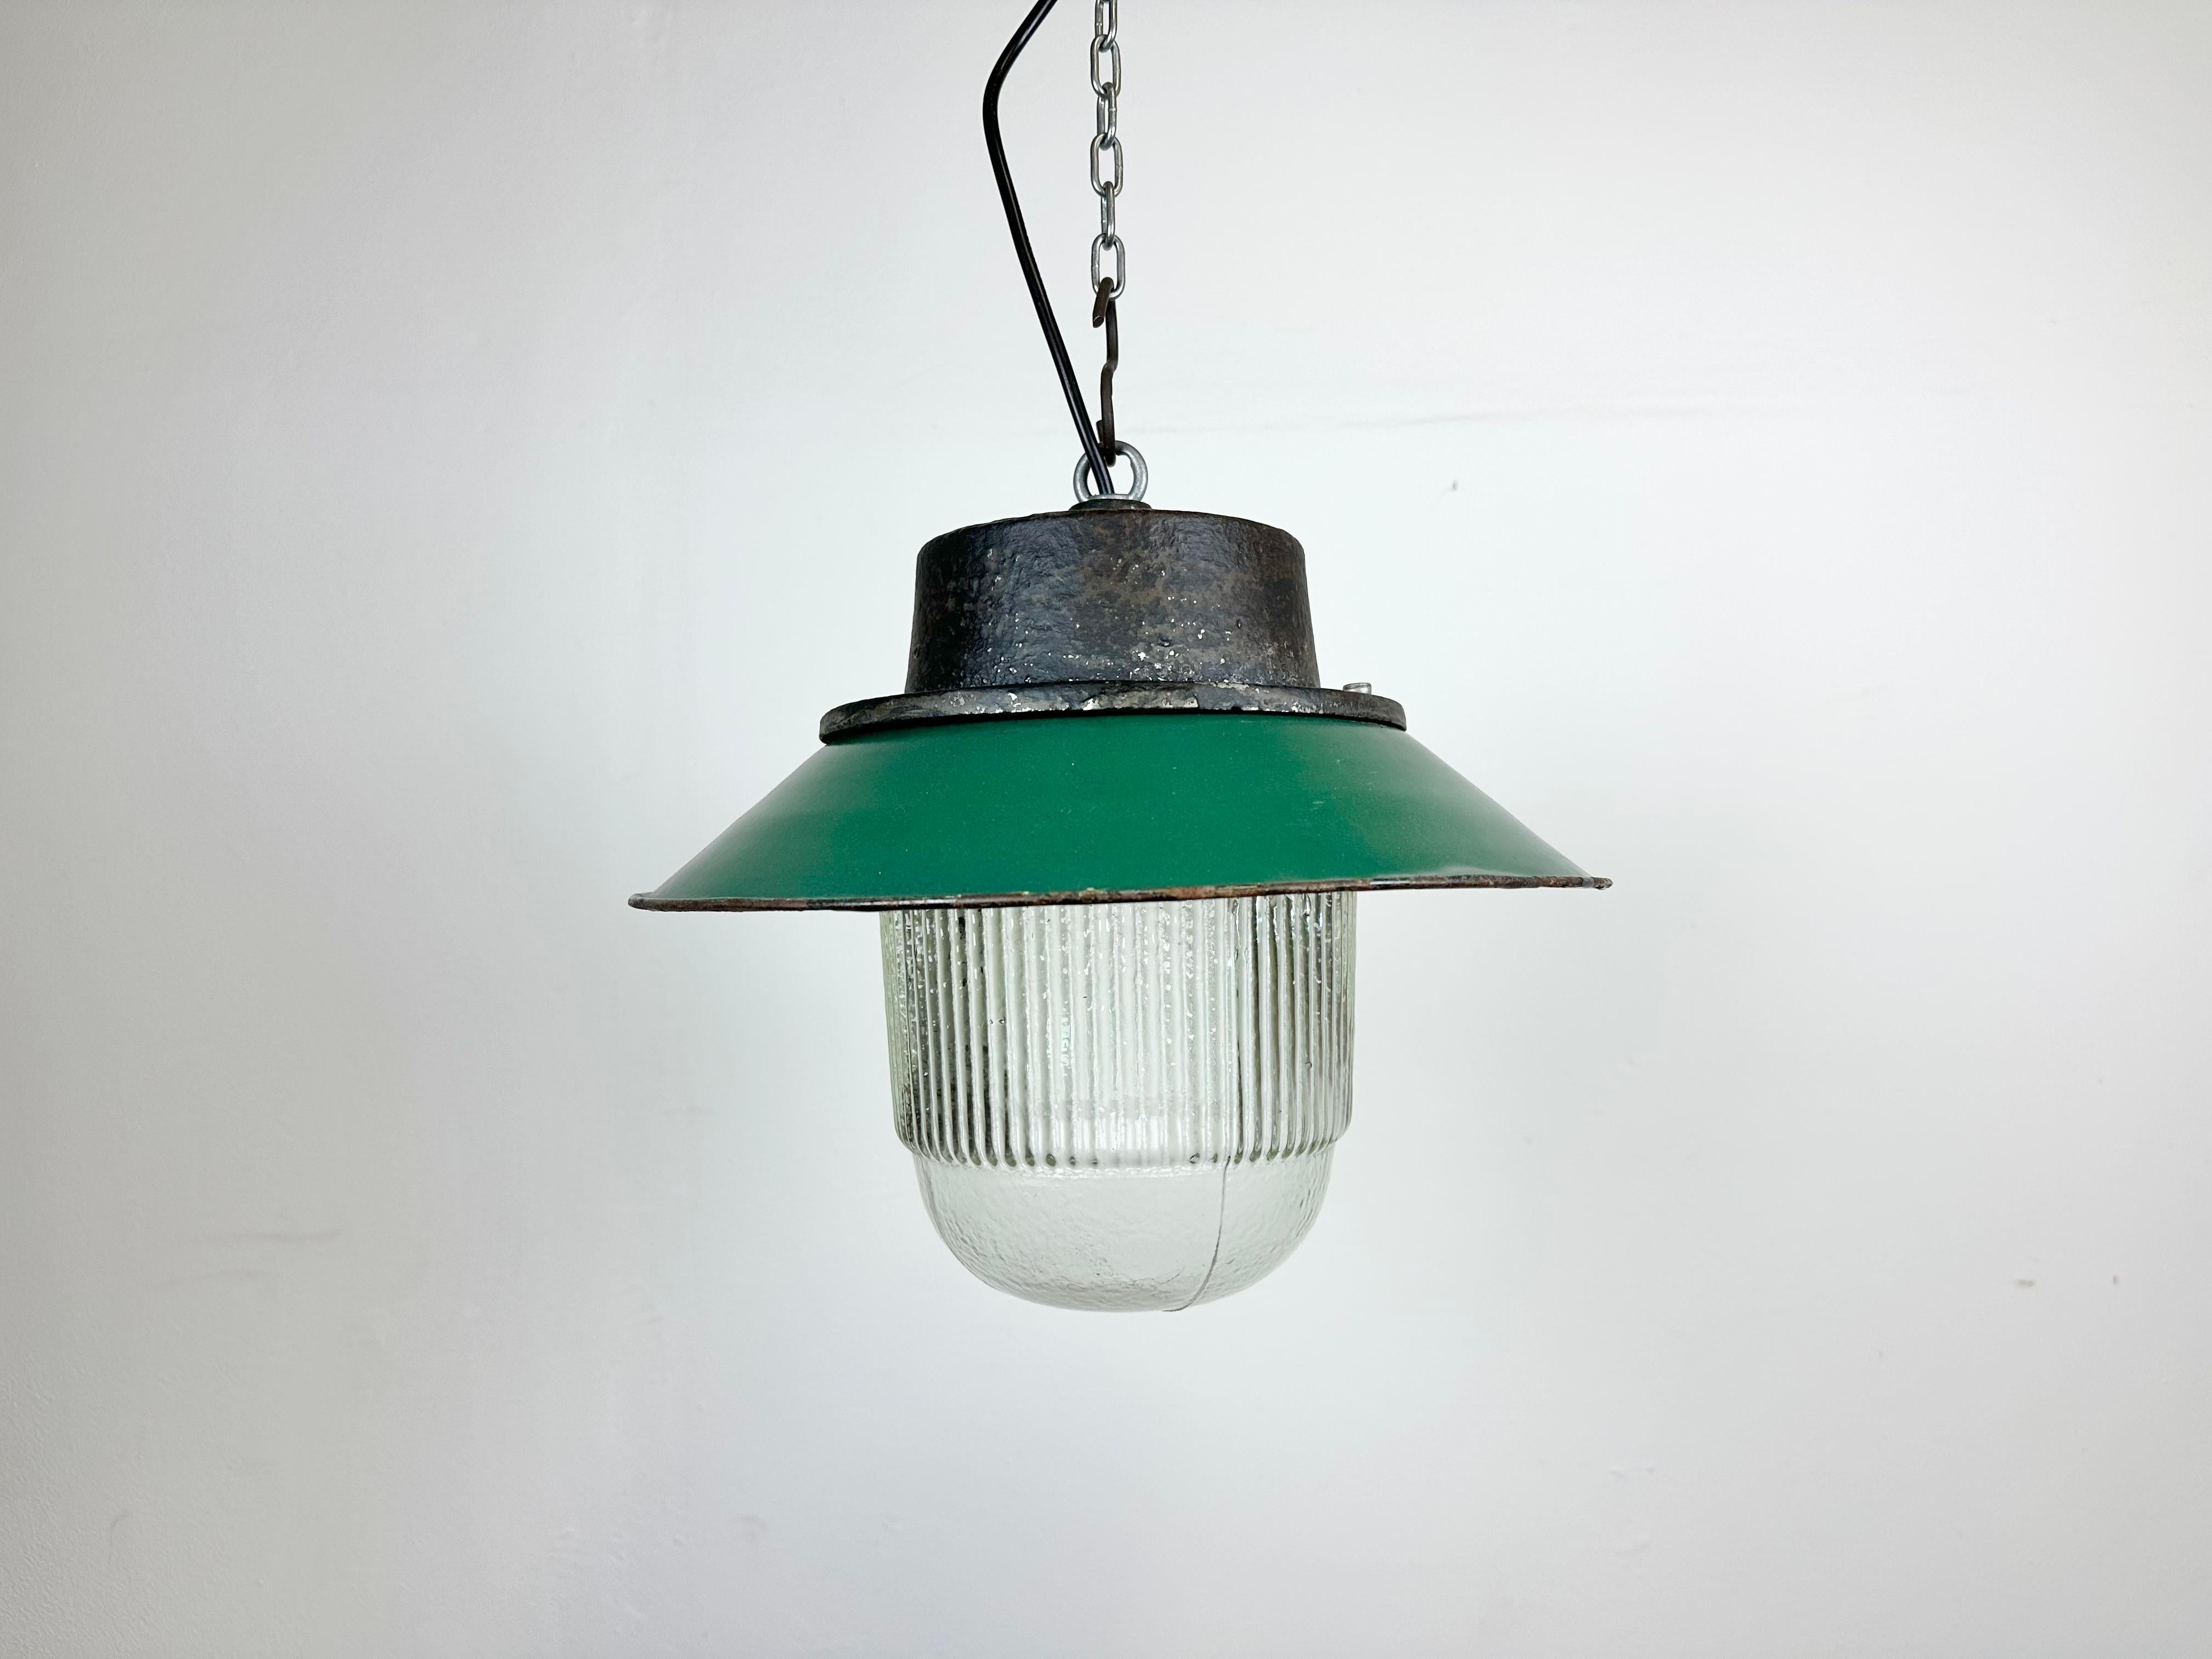 Polish Green Enamel and Cast Iron Industrial Pendant Light, 1960s For Sale